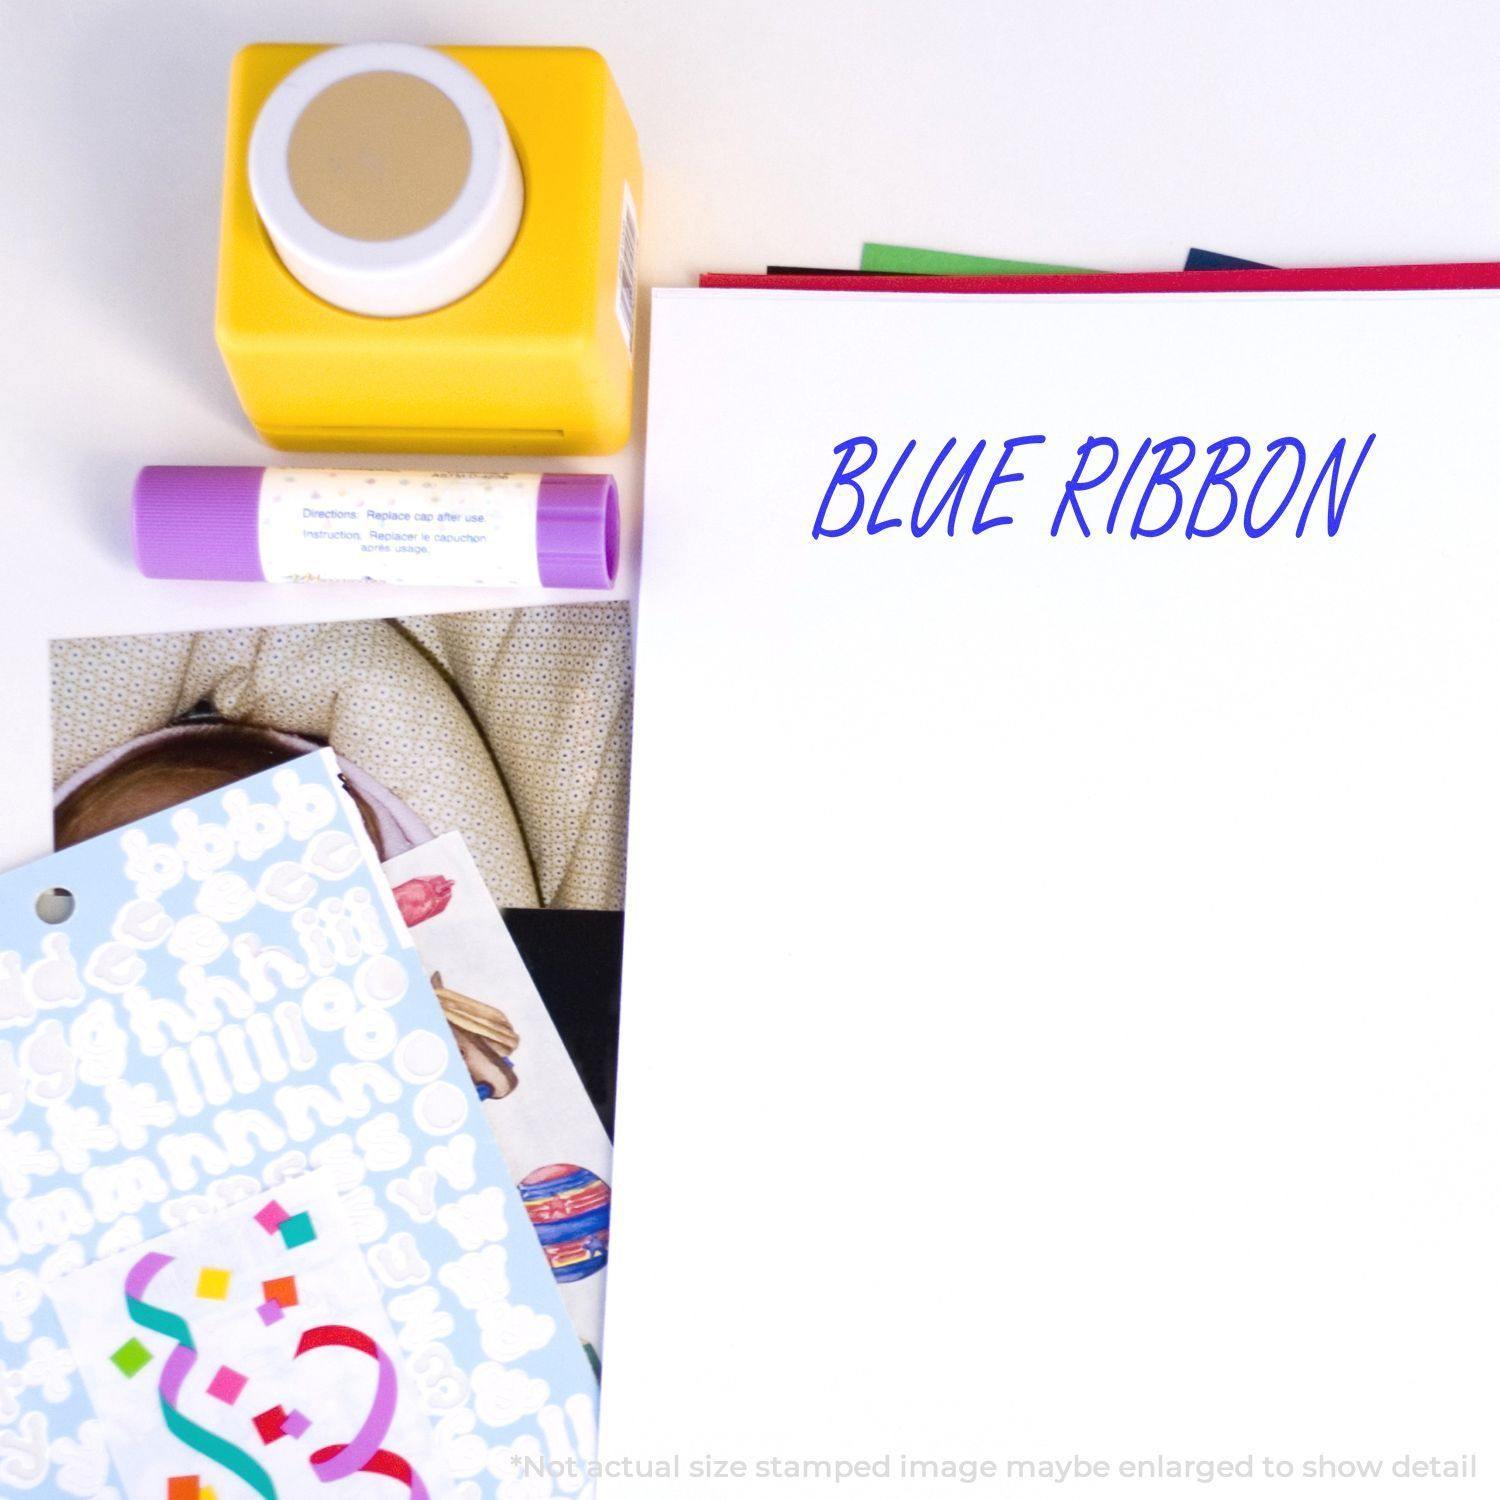 A stock office rubber stamp with a stamped image showing how the text "BLUE RIBBON" is displayed after stamping.